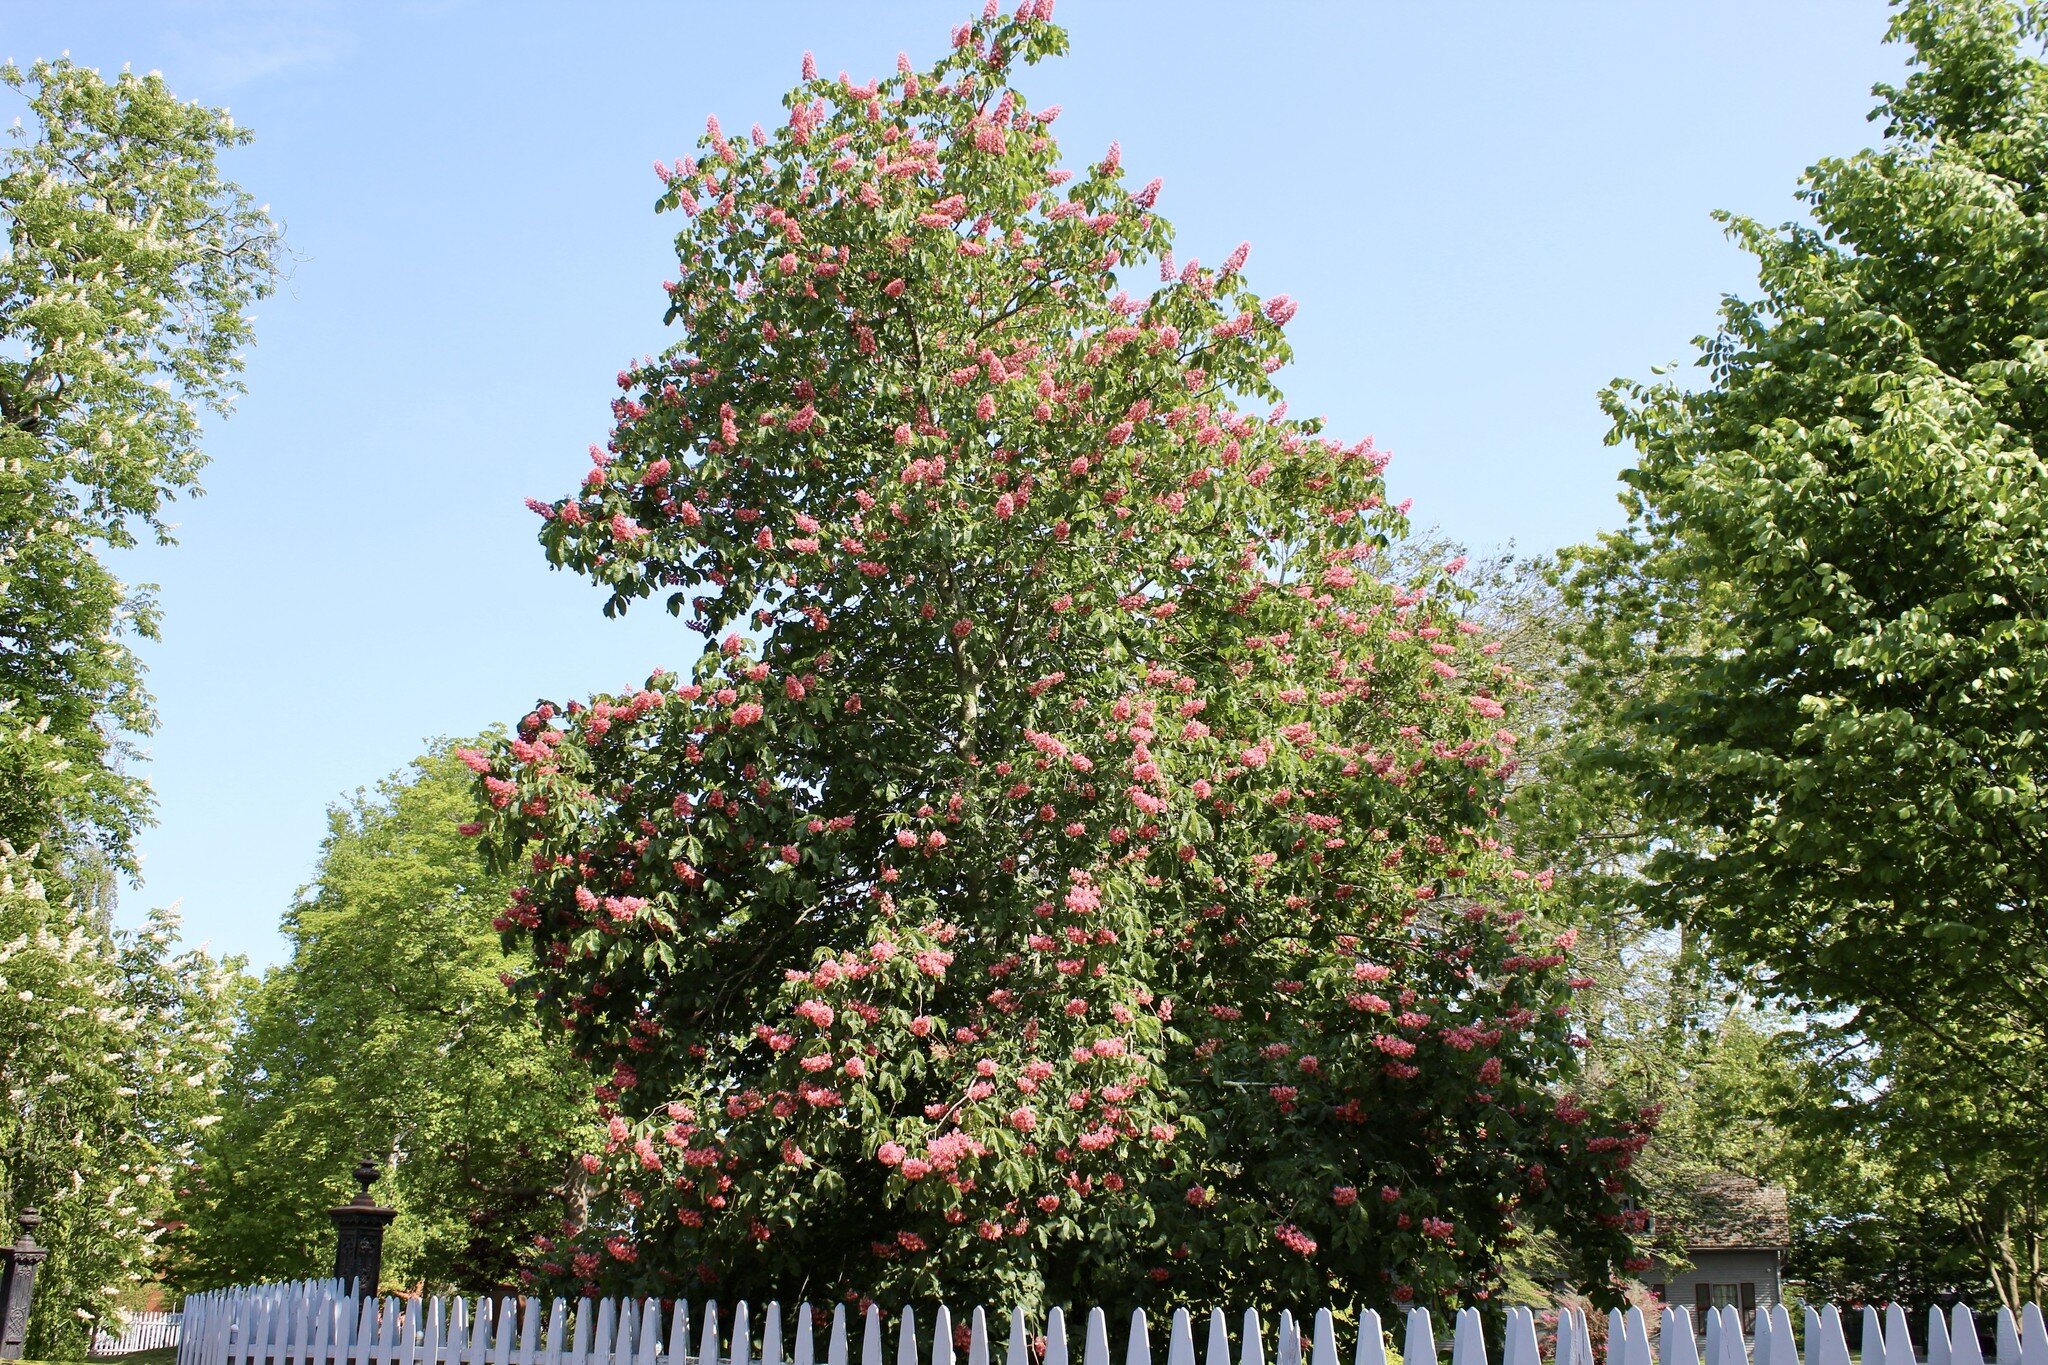 The unmistakable red horse chestnut (Aesculus x carnea) is this week&rsquo;s choice, in full bloom and looking delightful along Bowery Street at Kingscote. Noting the size and deep color of the flowers, it is very likely that our individual is the cu